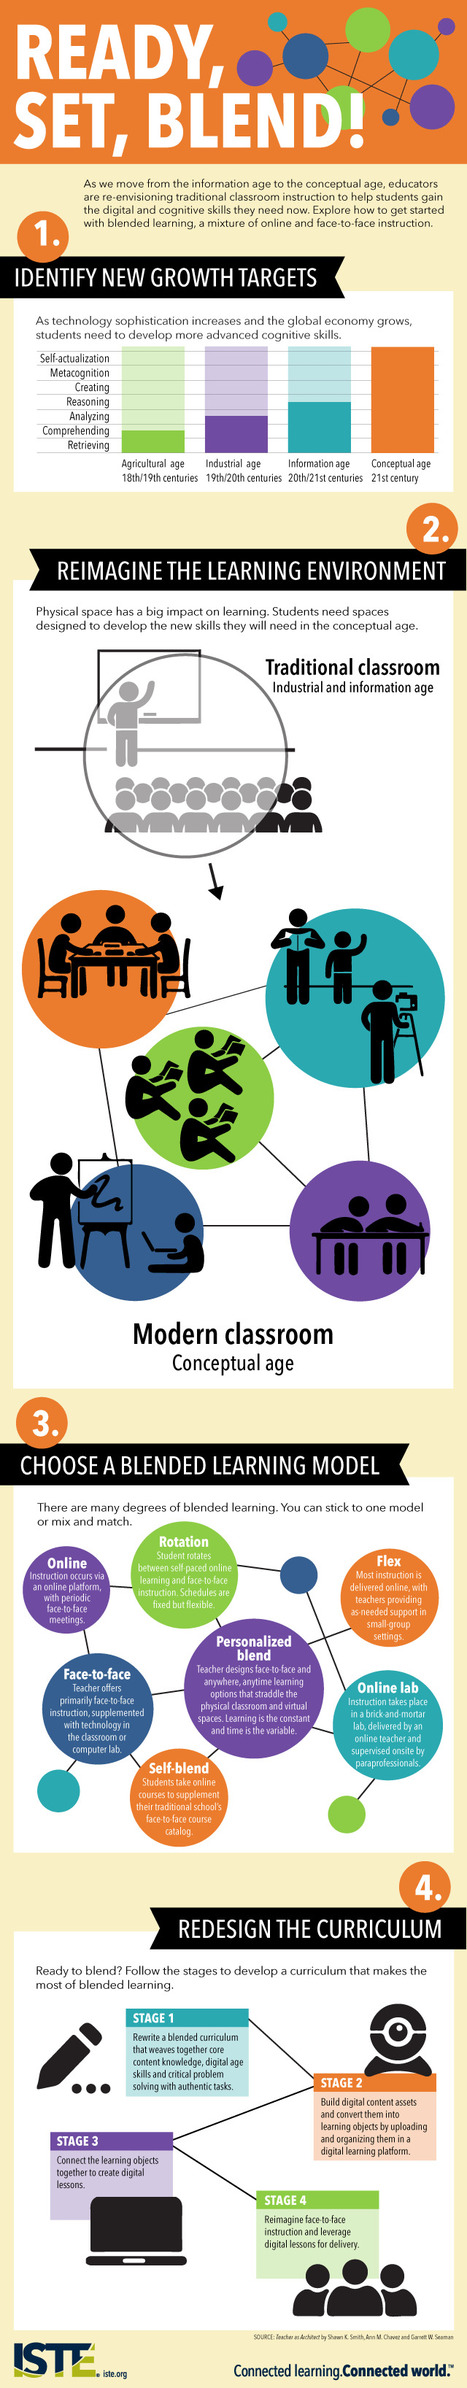 Personalized Learning: Ready, Set, Blend! | Visual*~*Revolution | Scoop.it